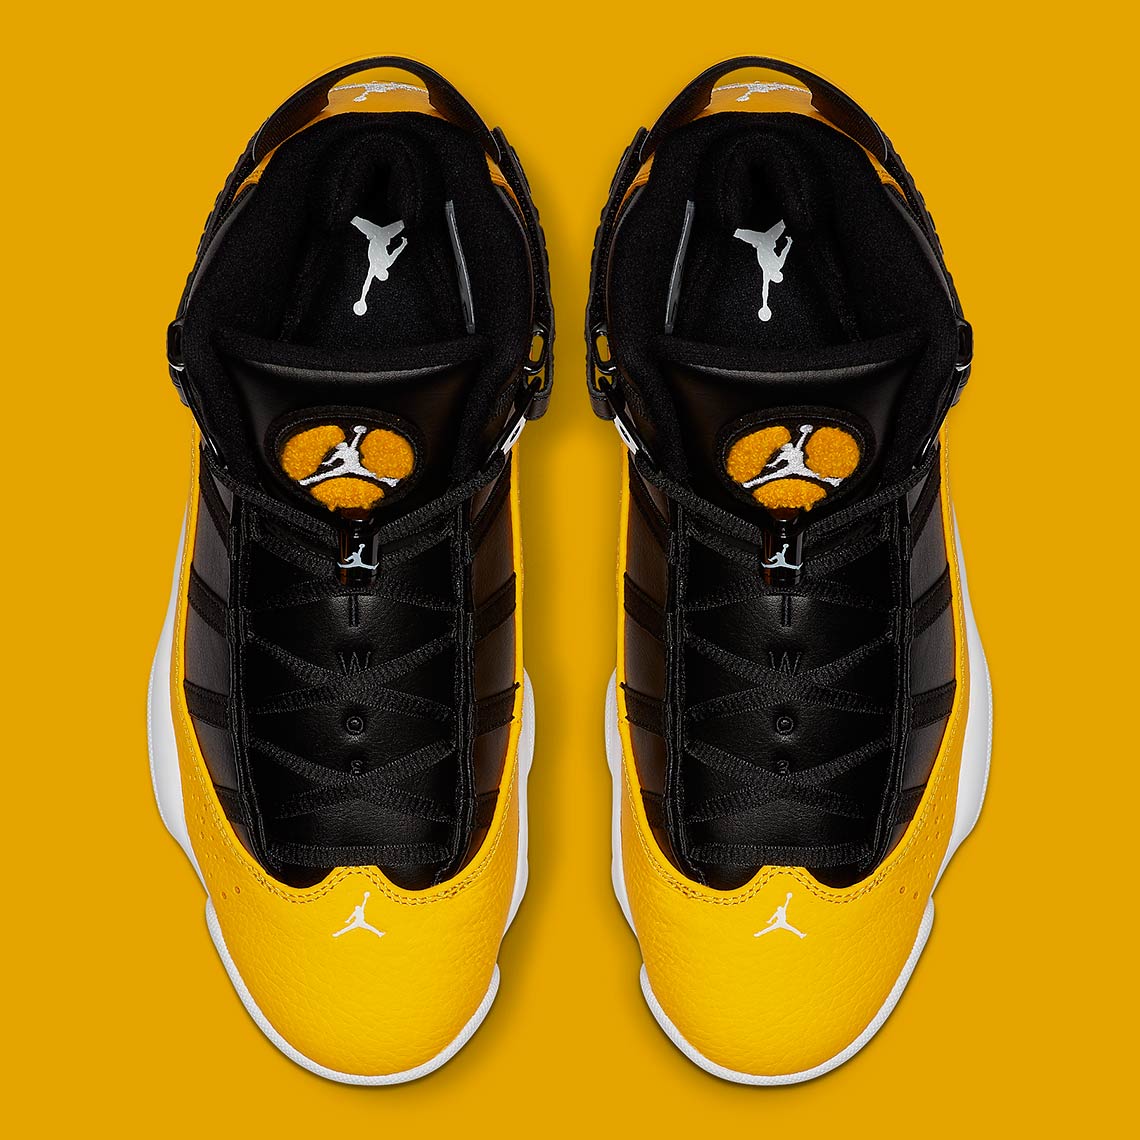 Jordan 6 Rings &quot;Taxi&quot; Will Reportedly Drop This Month